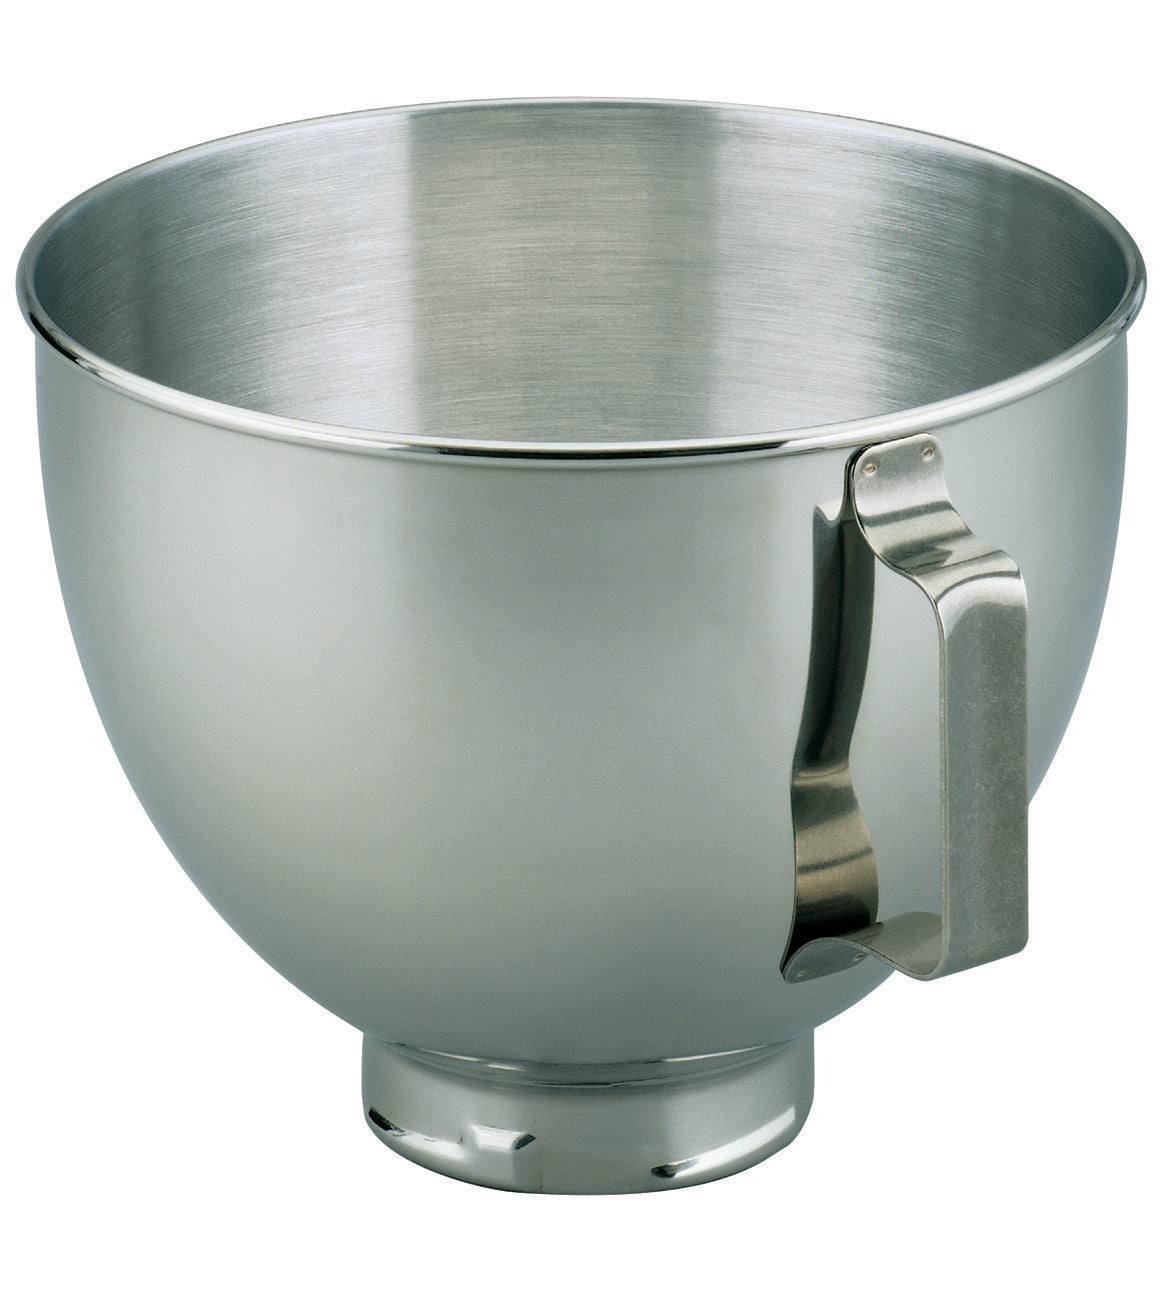 KitchenAid K45SBWH Stainless Steel Bowl With Handle, 4.5 Qt.